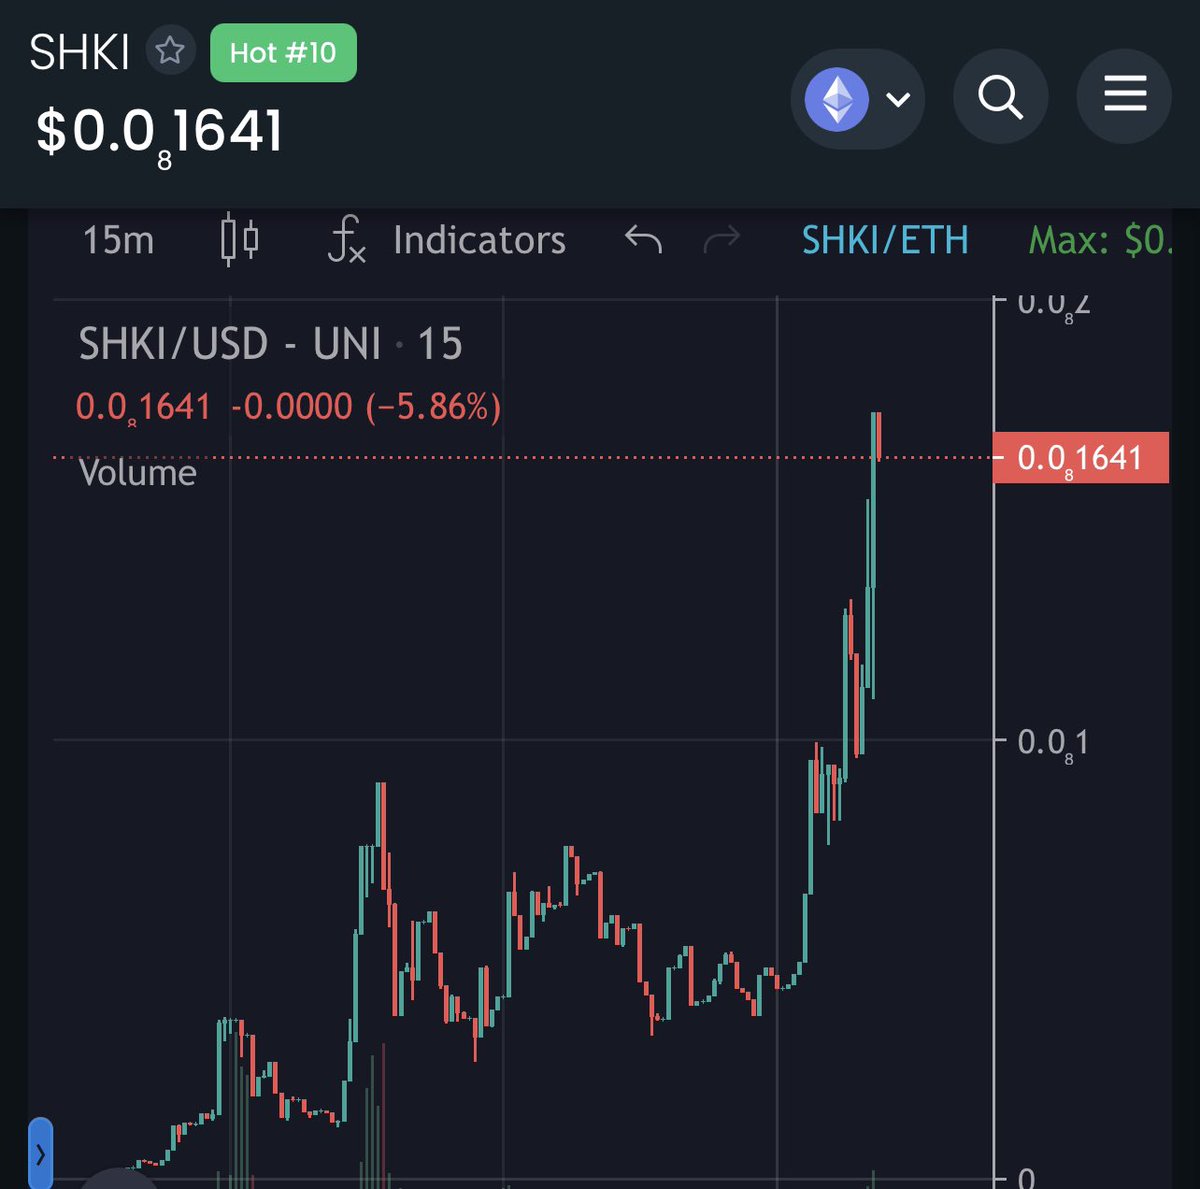 $SHKI | @shkreli_inu taking off☄️

- Millionaire wallets apeing in💰

- @crypto_bitlord7 and the man himself @Enrique5060782 in the chat

- Rest of the CT is going to hear abt it soon👀

- Fought a lot of FUD. Community strong af now🔥

Over 15x for ones who aped w me at 100k ;)